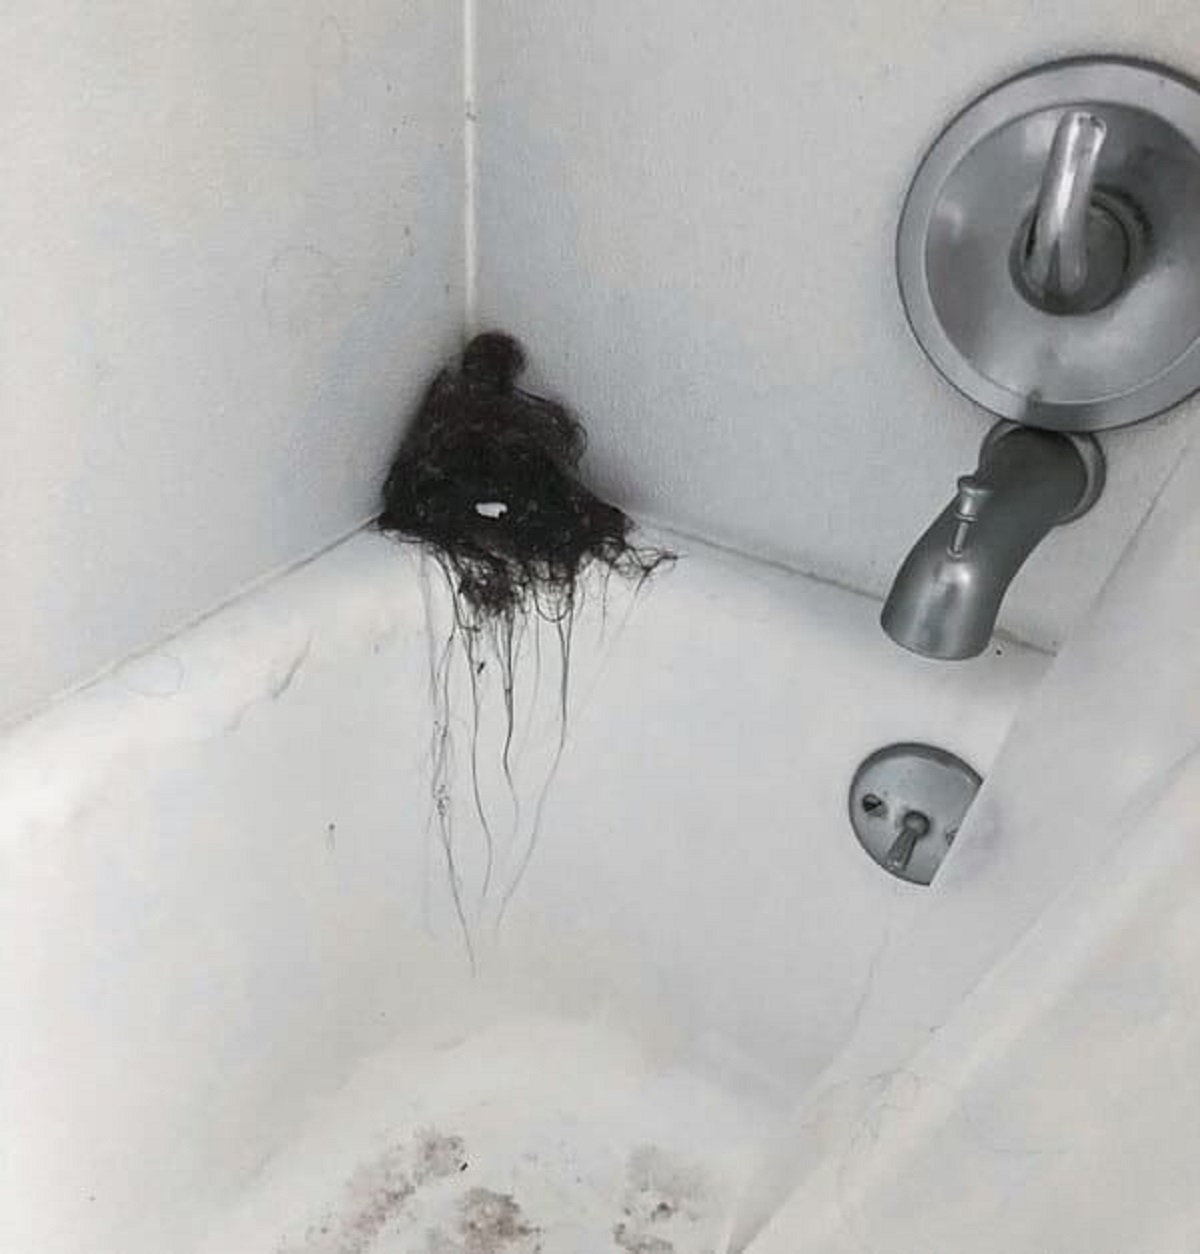 “I Went To A Classmate’s Apartment To Work On A Project. This Mountain Of Hair Will Haunt Me Forever”